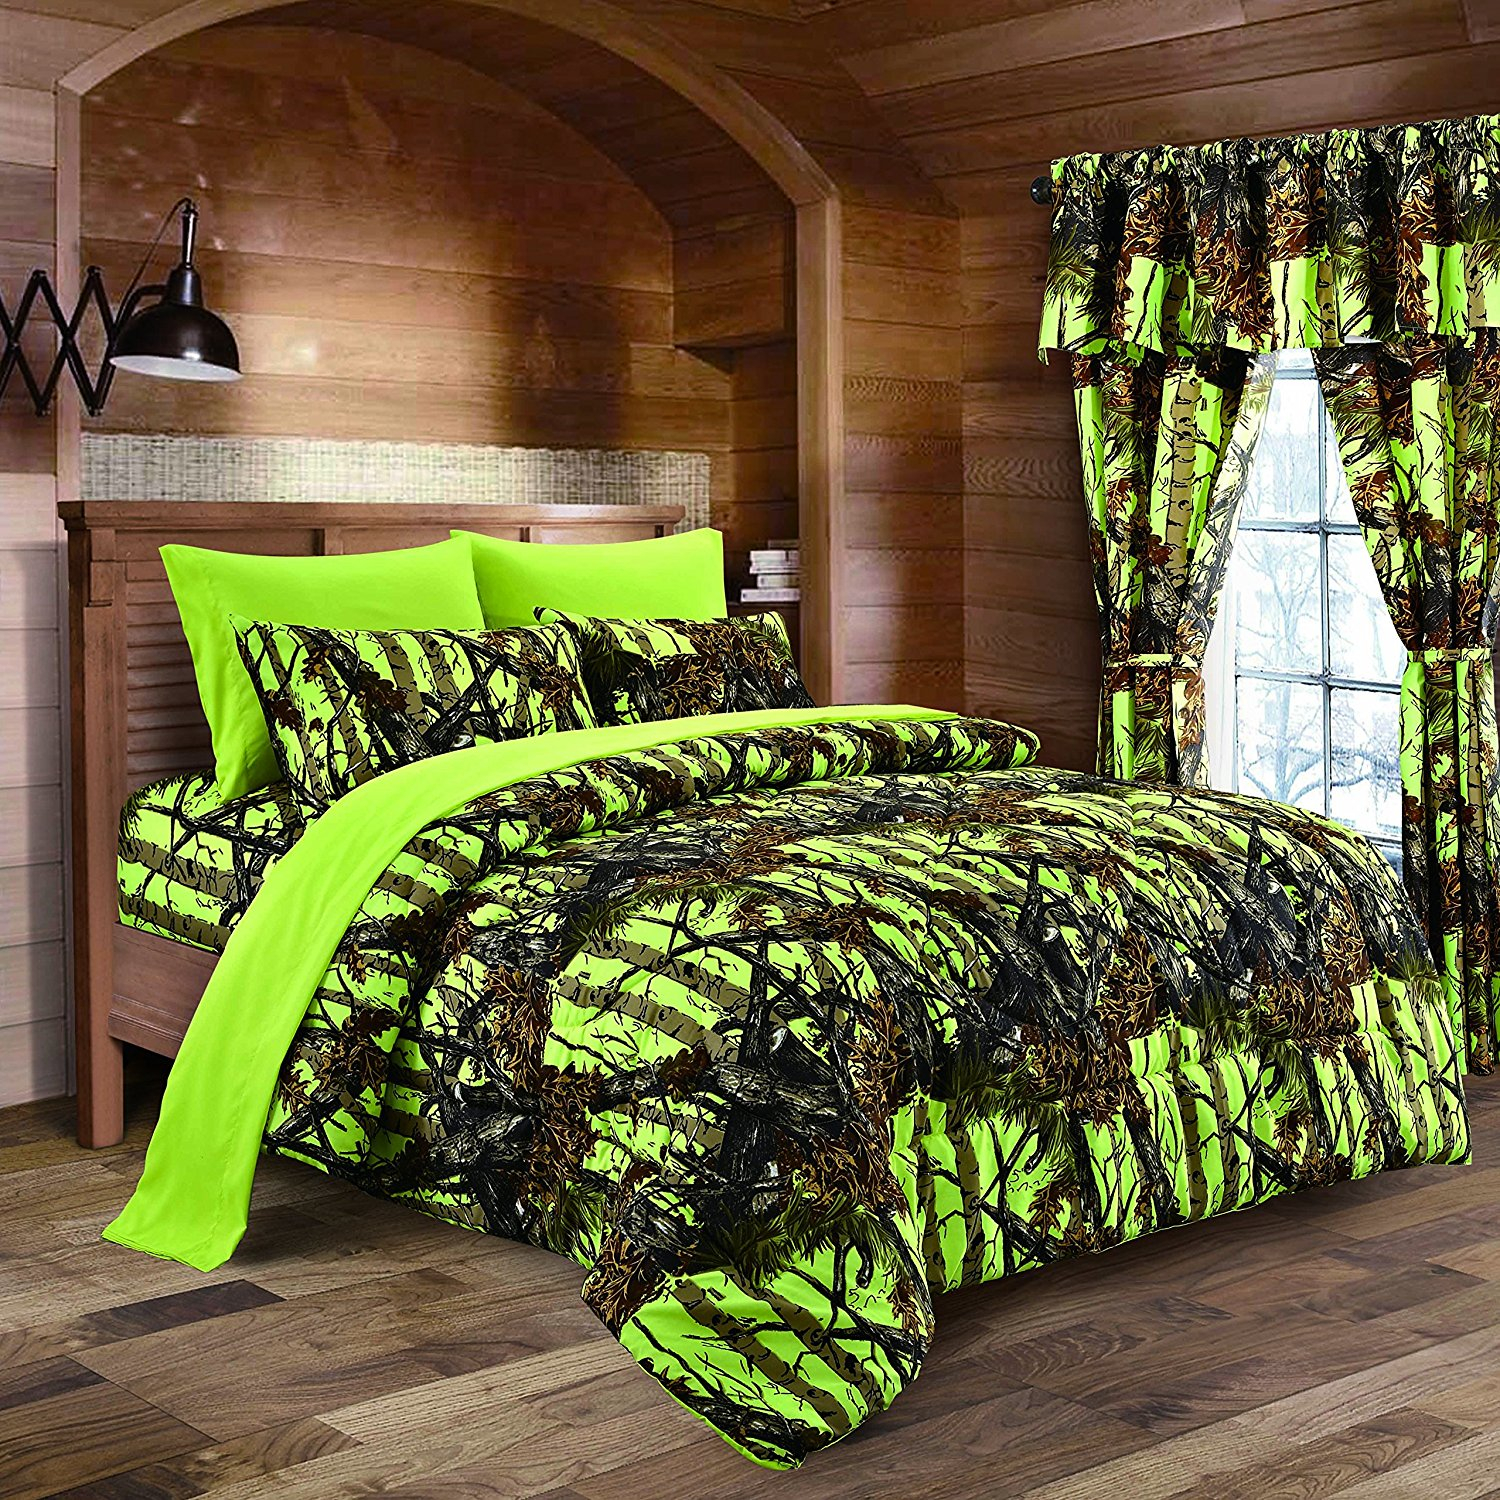 Lime Camouflage Queen Size 8pc Comforter Sheet Pillowcases And Bed Skirt Set Camo Bedding Sheet Set For Hunters Teens Boys And Girls in sizing 1500 X 1500